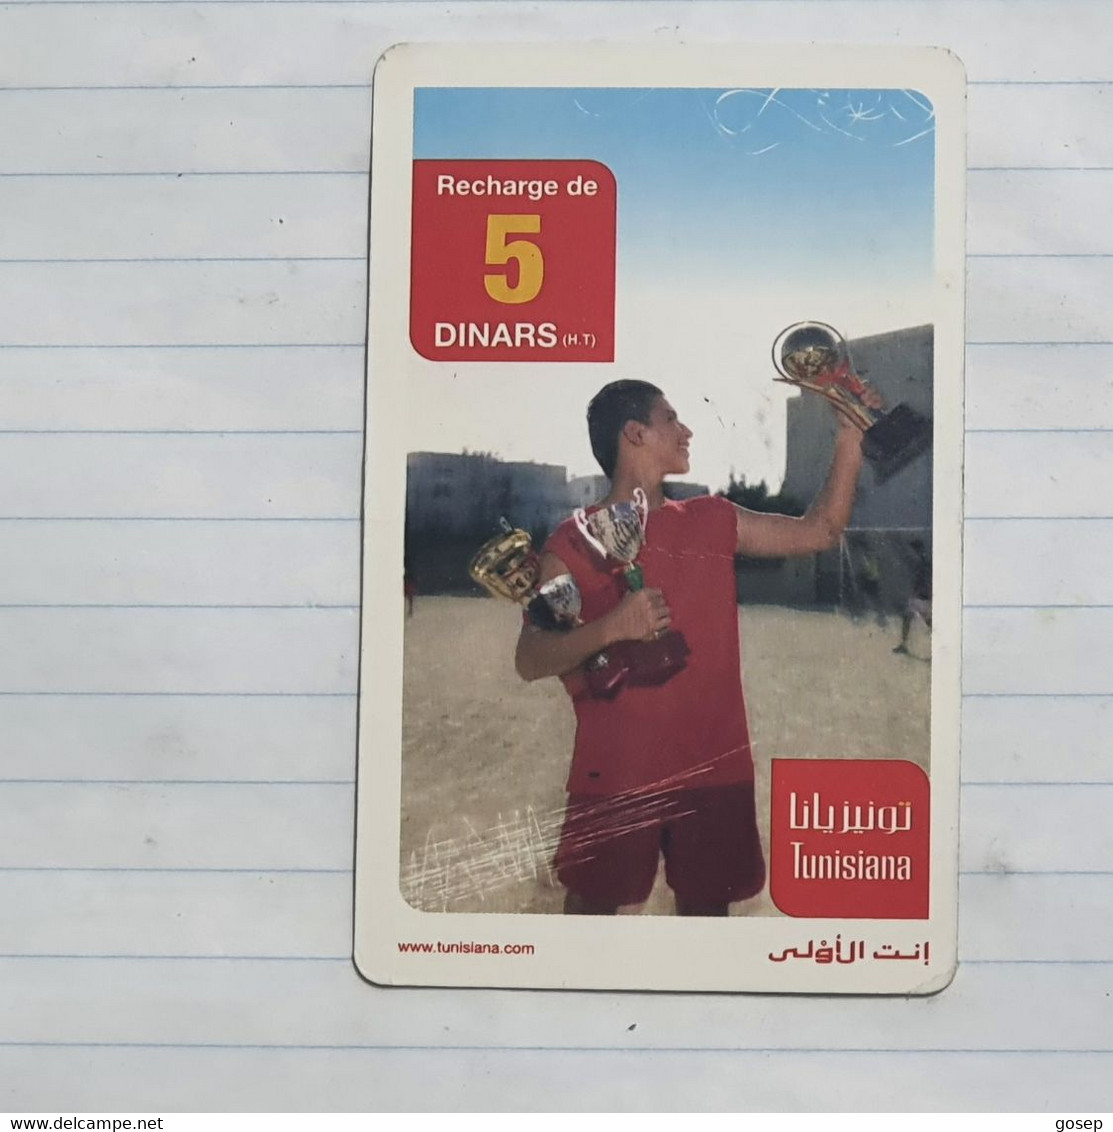 TUNISIA-(TUN-REF-TUN-21D7)-CHAMPIONS-(132)-(578-6485-858-1127)-(look From Out Side Card Barcode)-used Card - Tunesië